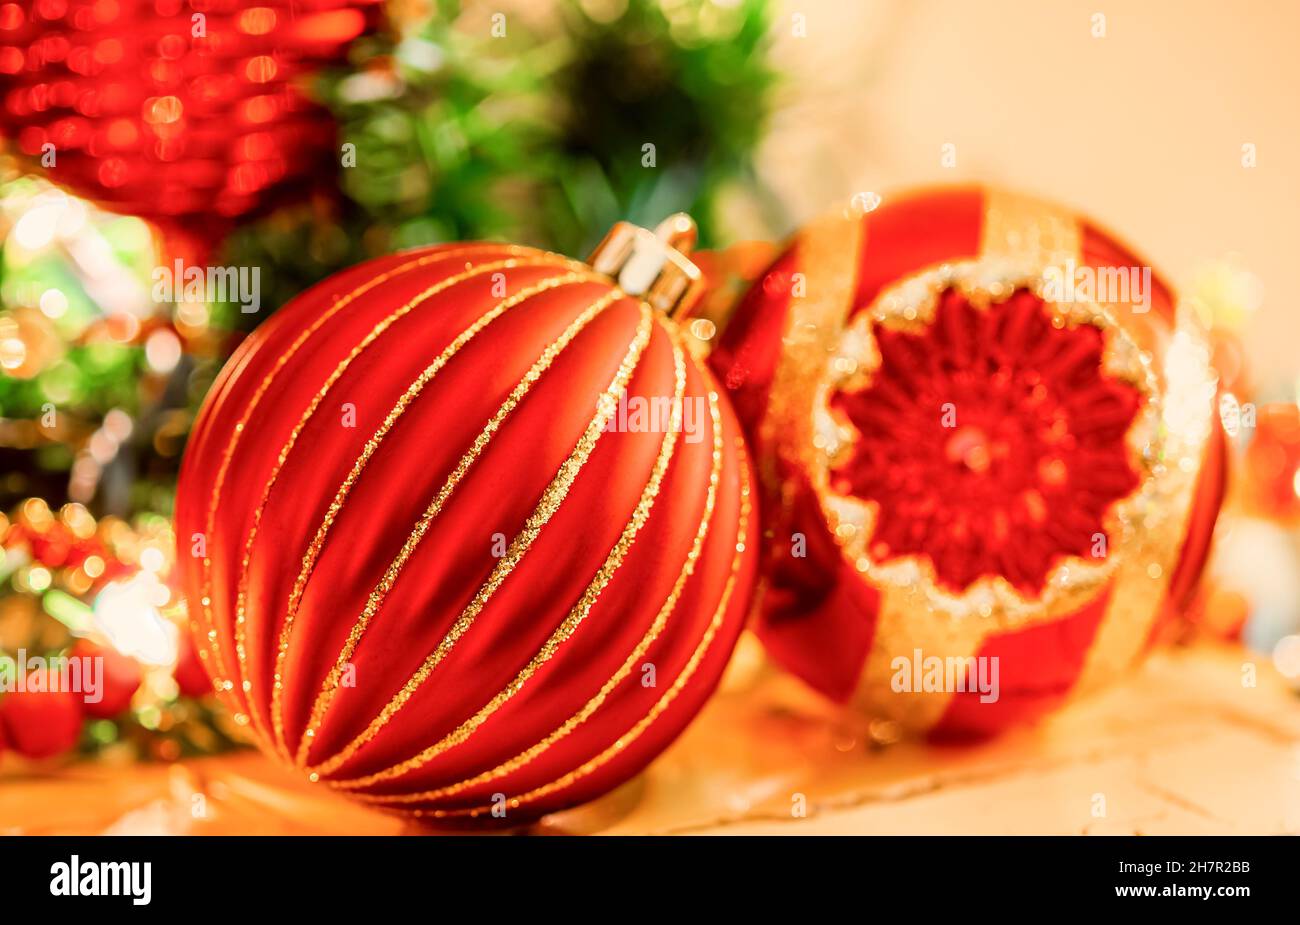 Christmas ornament in red and gold color in extreme close-up  is  surrounded by soft focus ornaments in bright glittering  colors on a fireplace mante Stock Photo